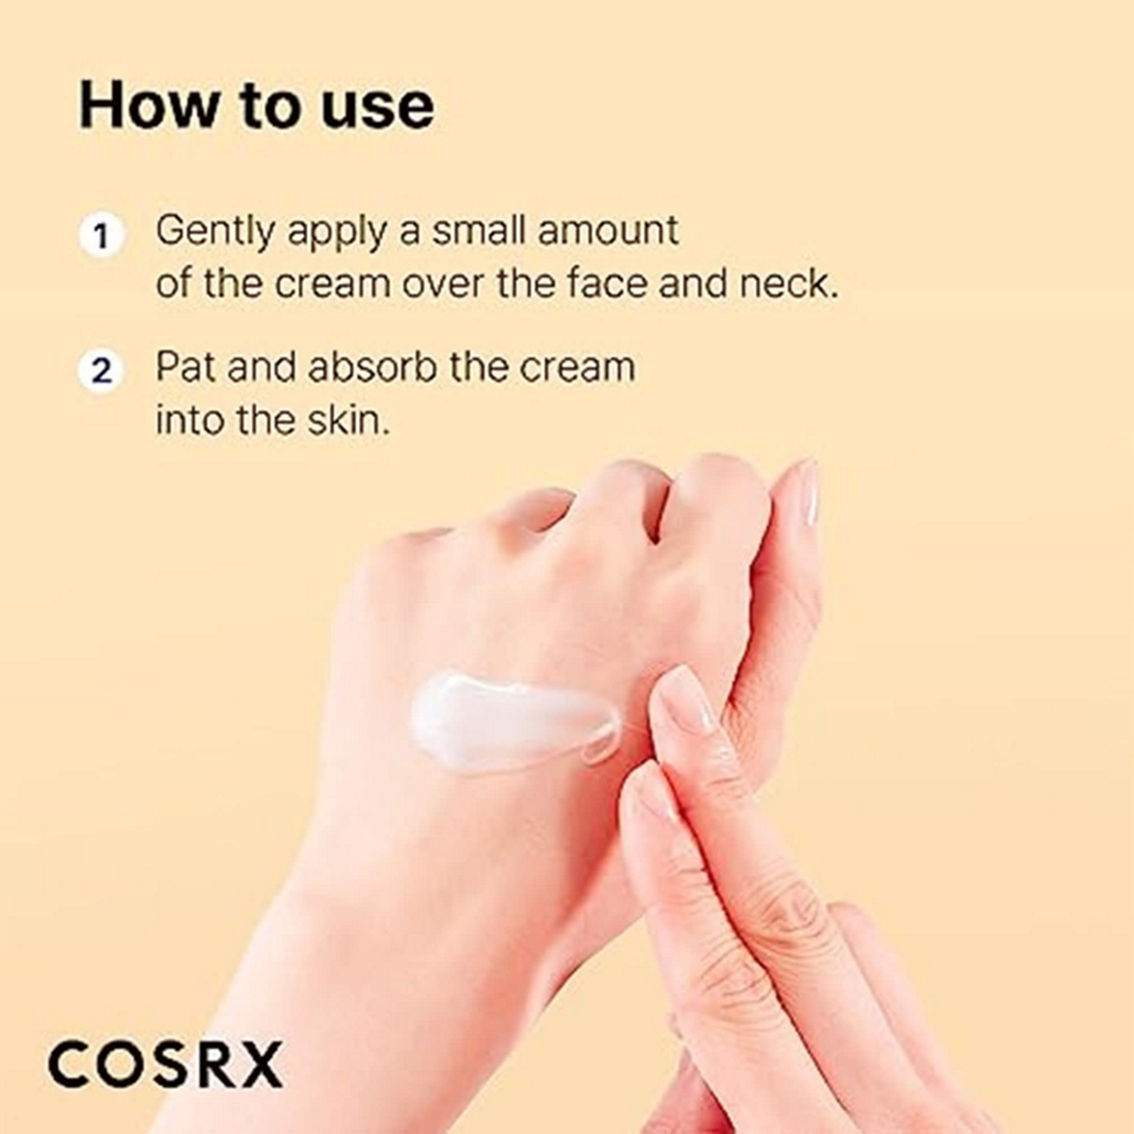 COSRX Advanced Snail 92 All in One Cream 100 g - Image 5 of 5